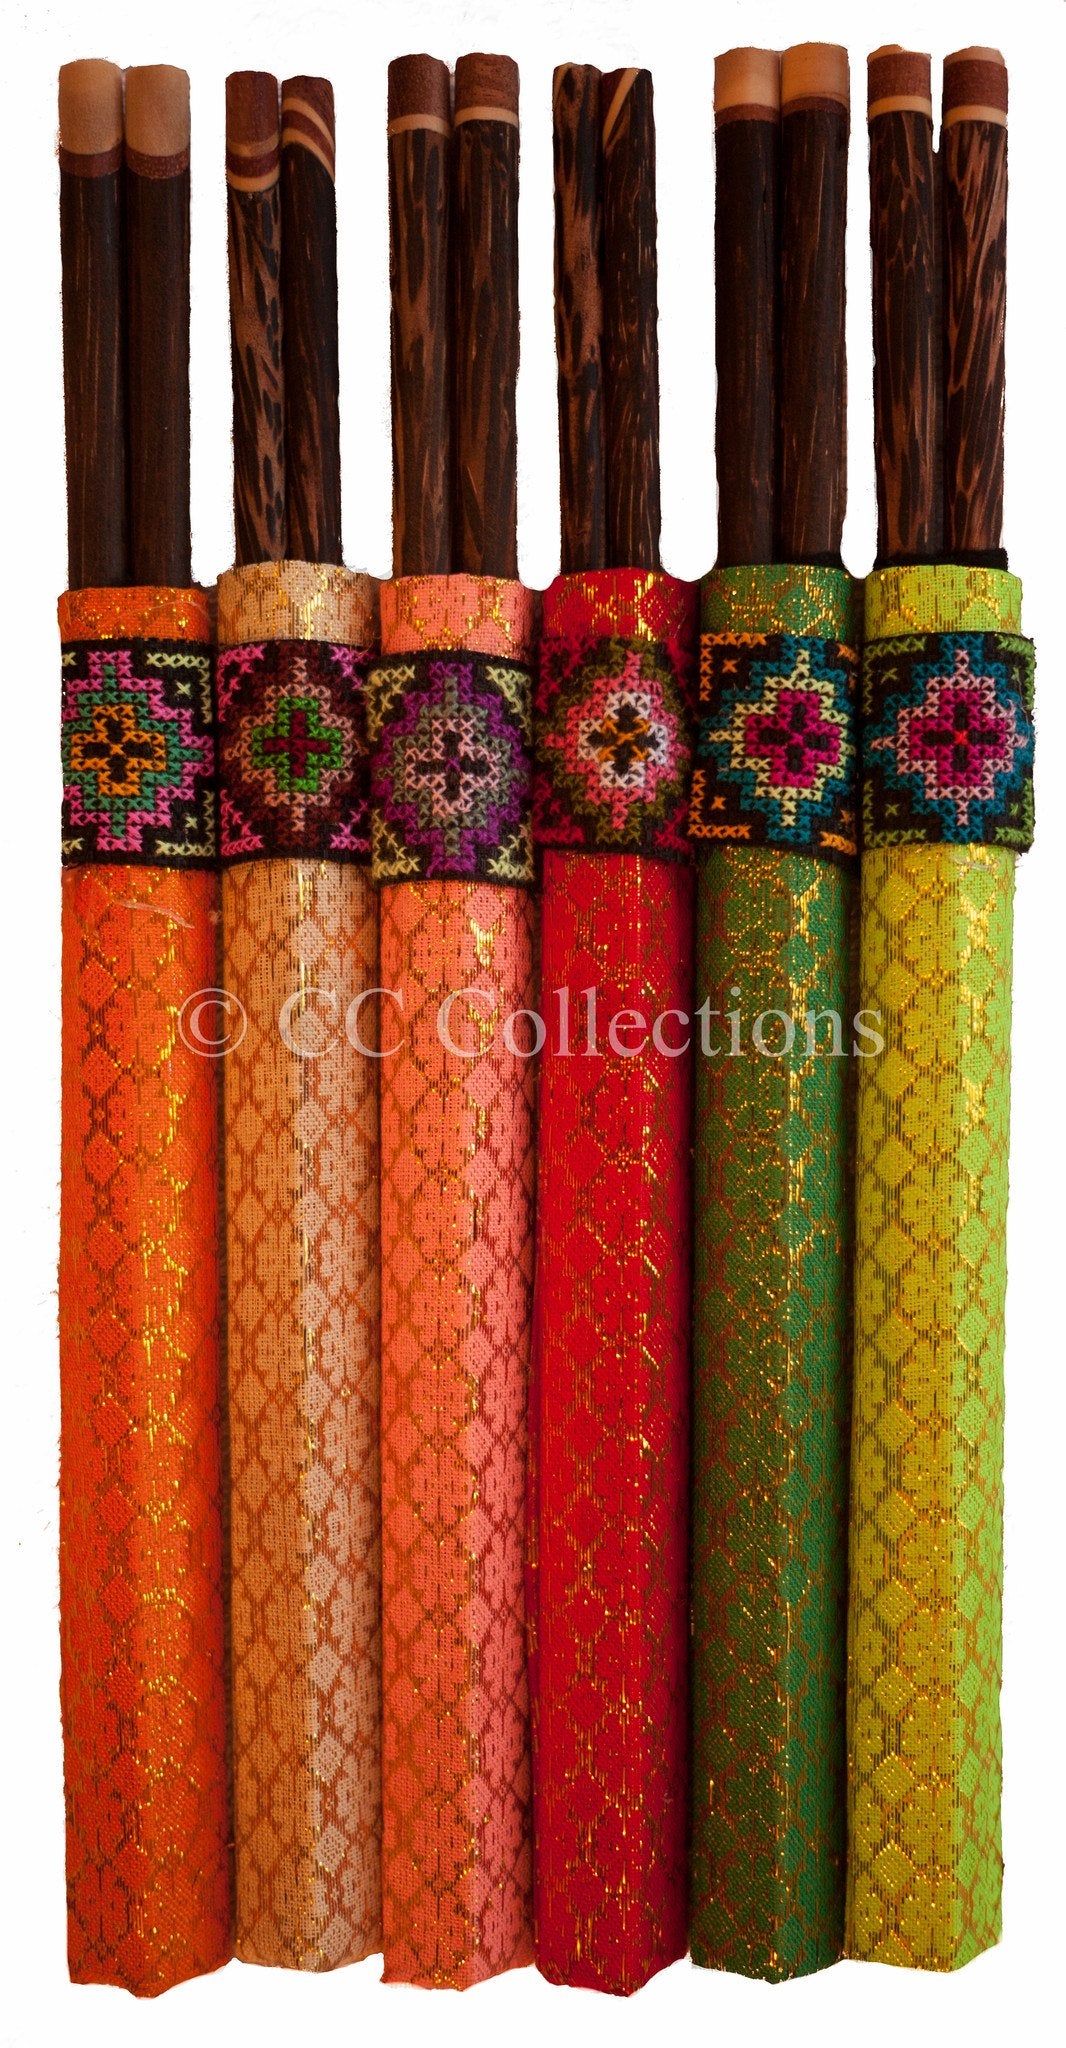 Orential Chopstick 6 Sets with sheath cover - CCCollections